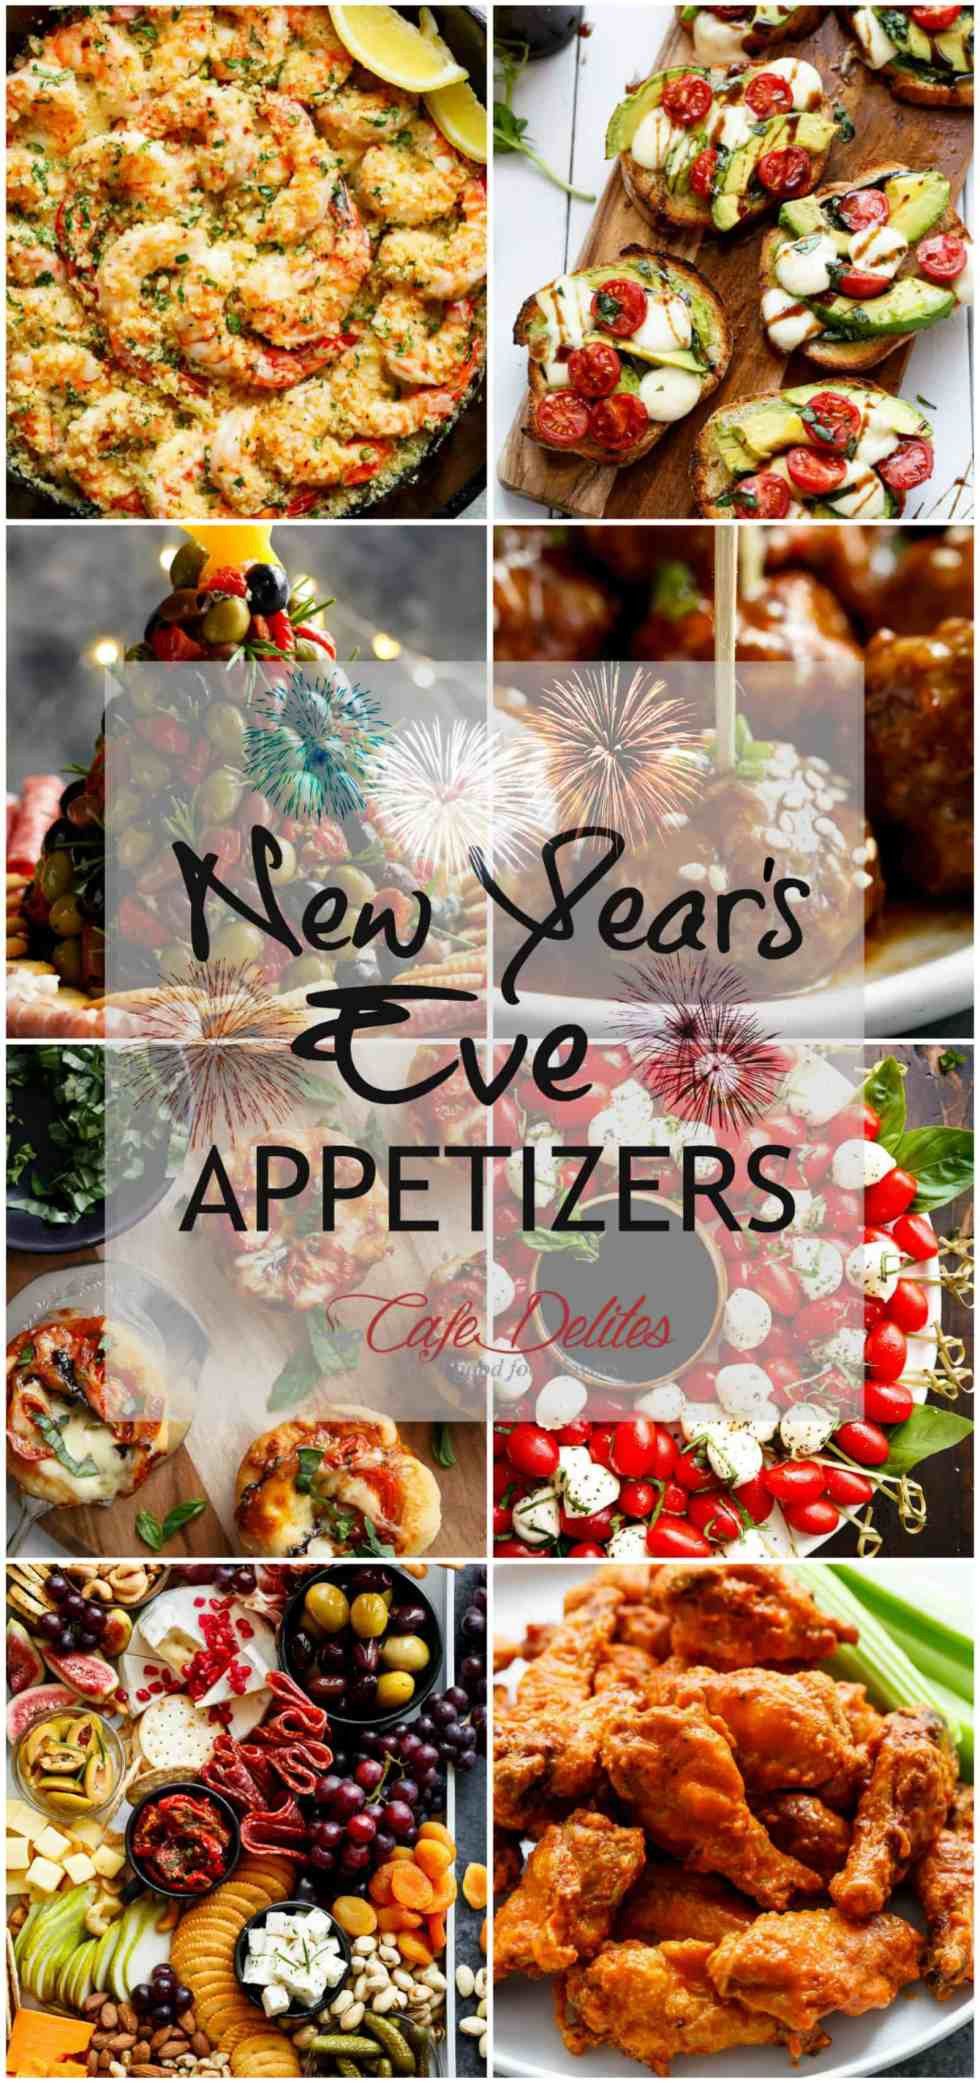 Best New Years Eve Appetizers
 The Best New Year s Eve Appetizers Cafe Delites